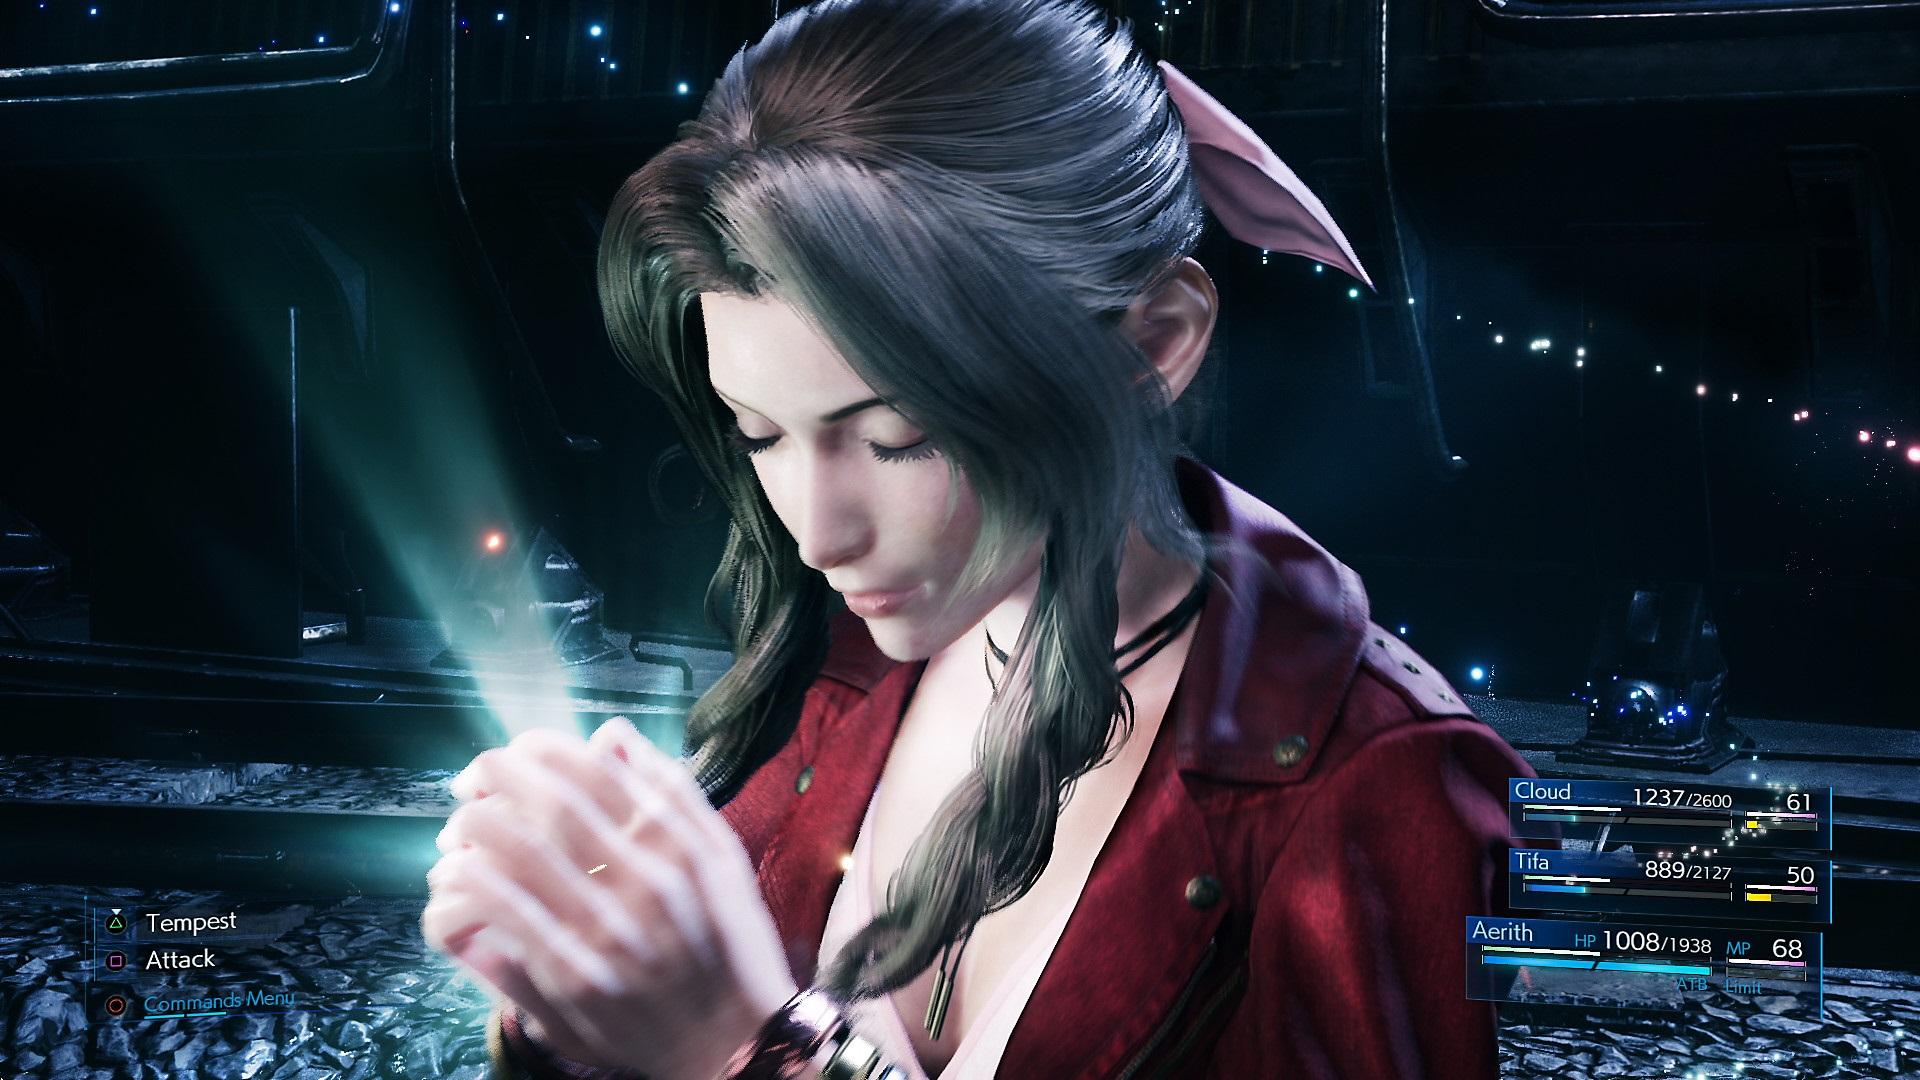 Apparent Final Fantasy 7 Remake PC Data Found in Datamined Demo